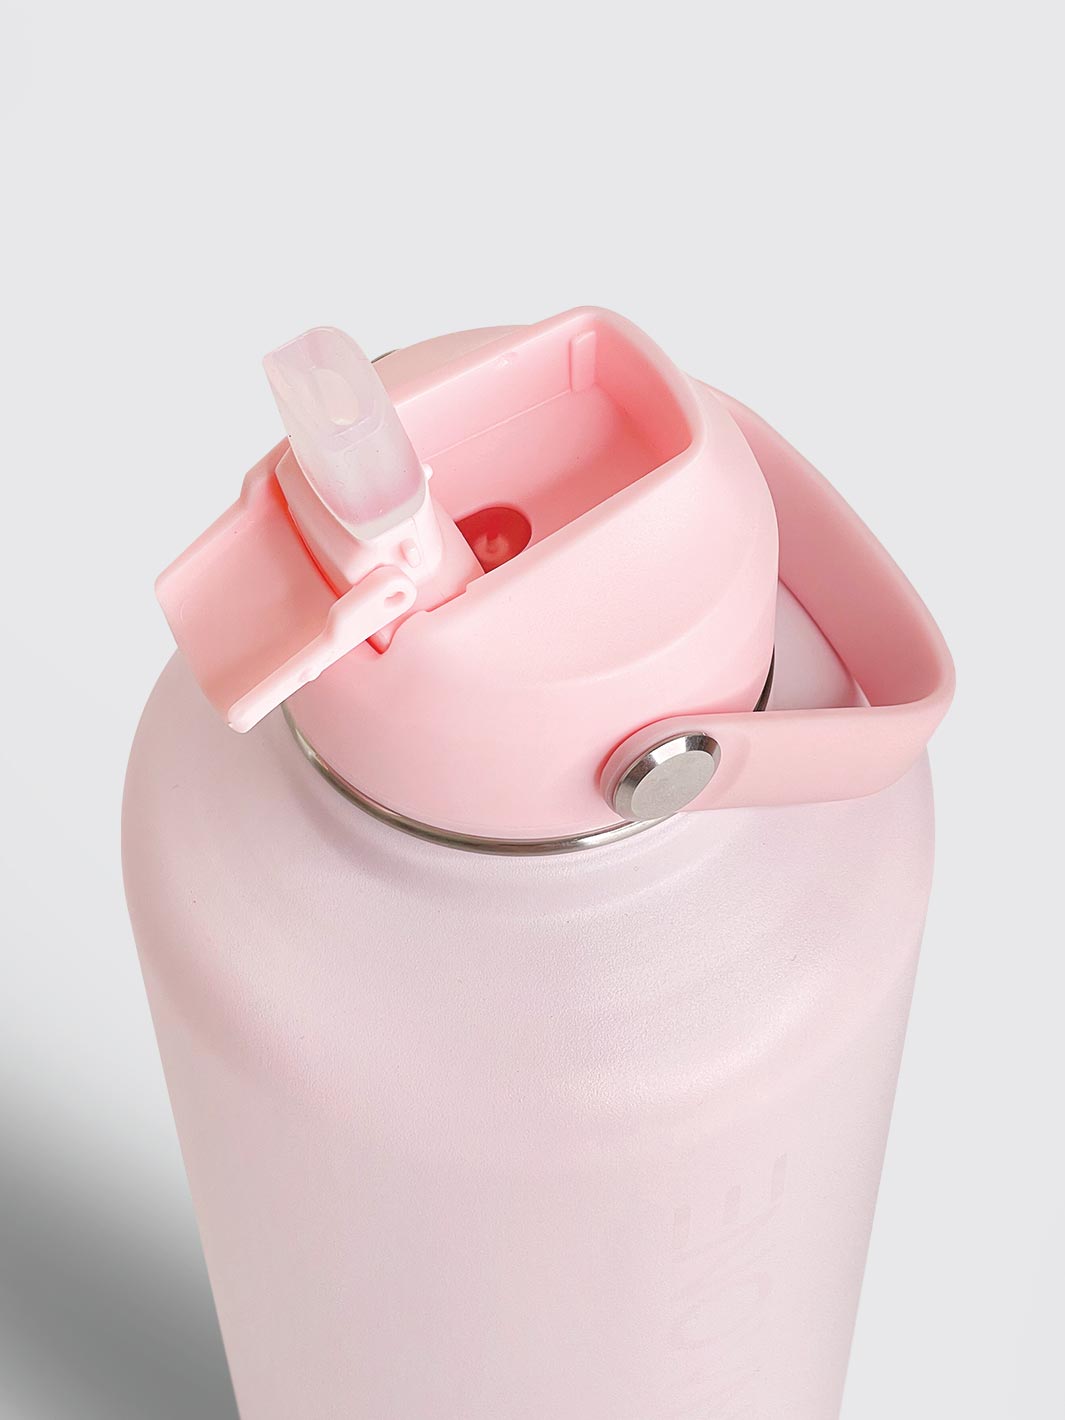 1.9L (64oz) Insulated Water Bottle with Straw Lid - Blush